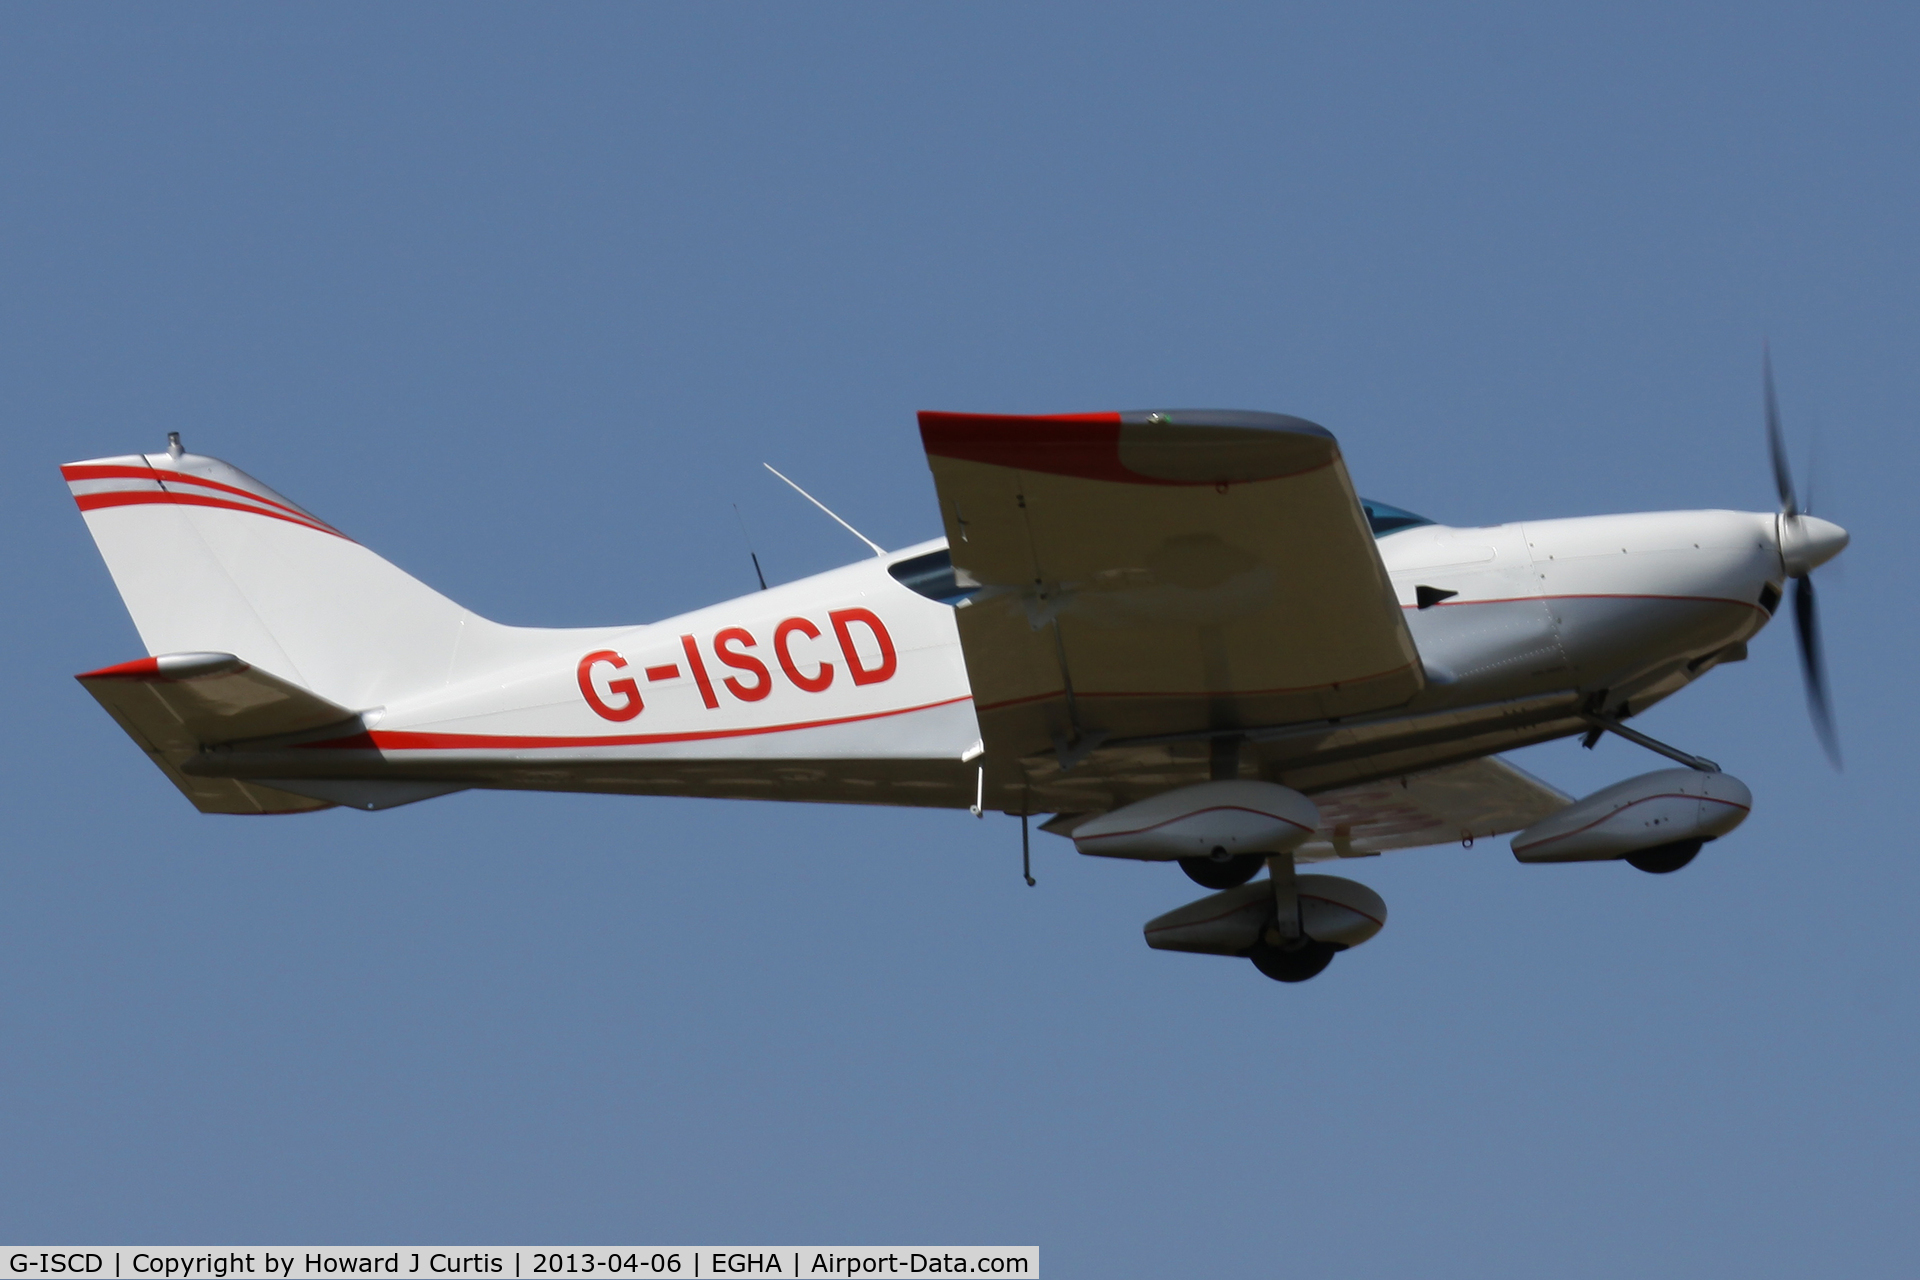 G-ISCD, 2010 CZAW SportCruiser C/N 10SC297, Privately owned. Caught on departure.